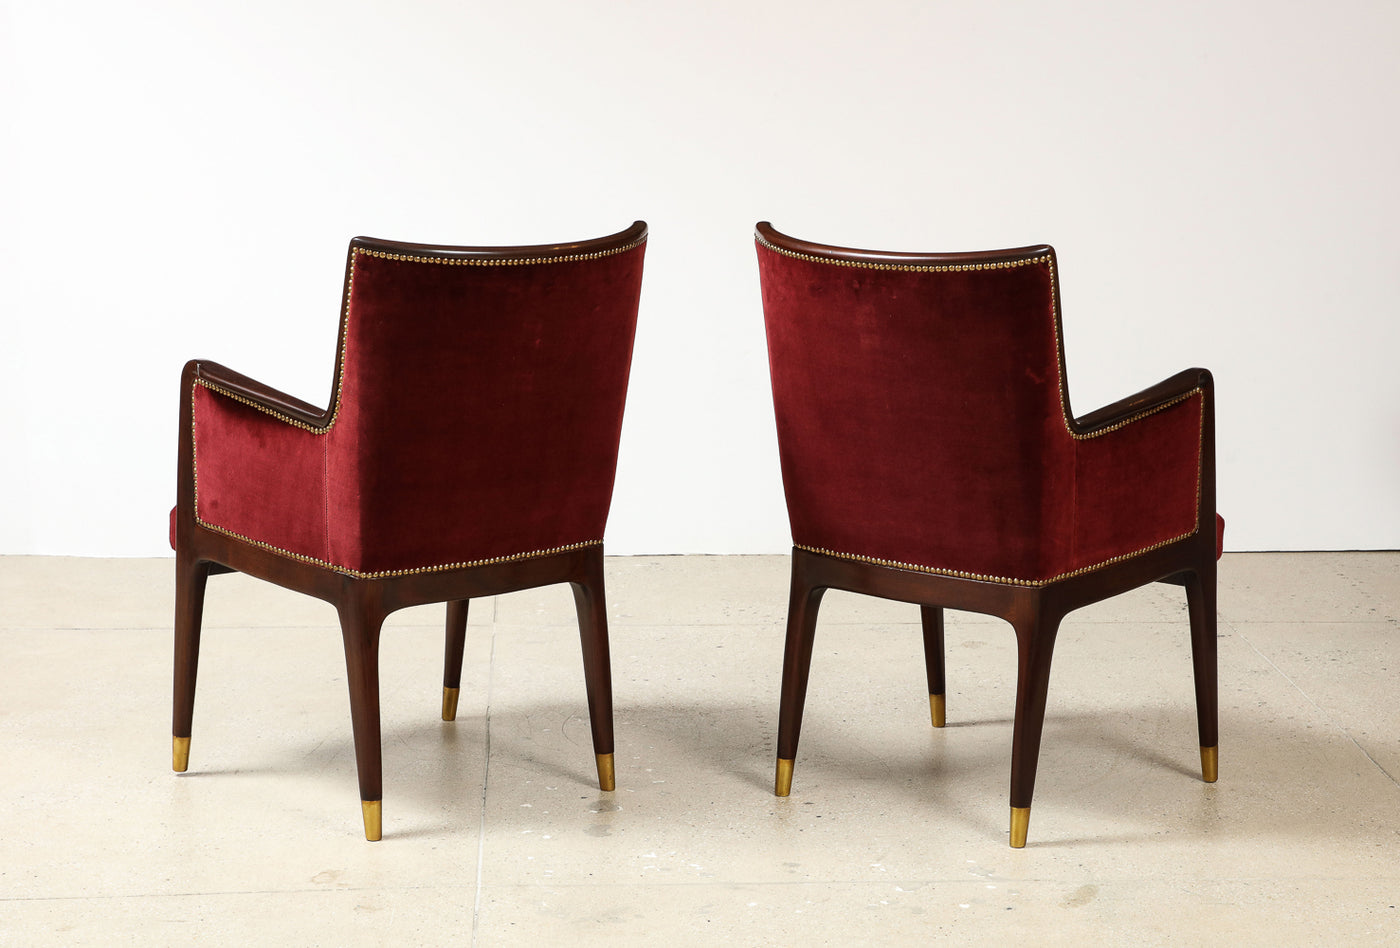 Pair of No. 504 Chairs by Gio Ponti